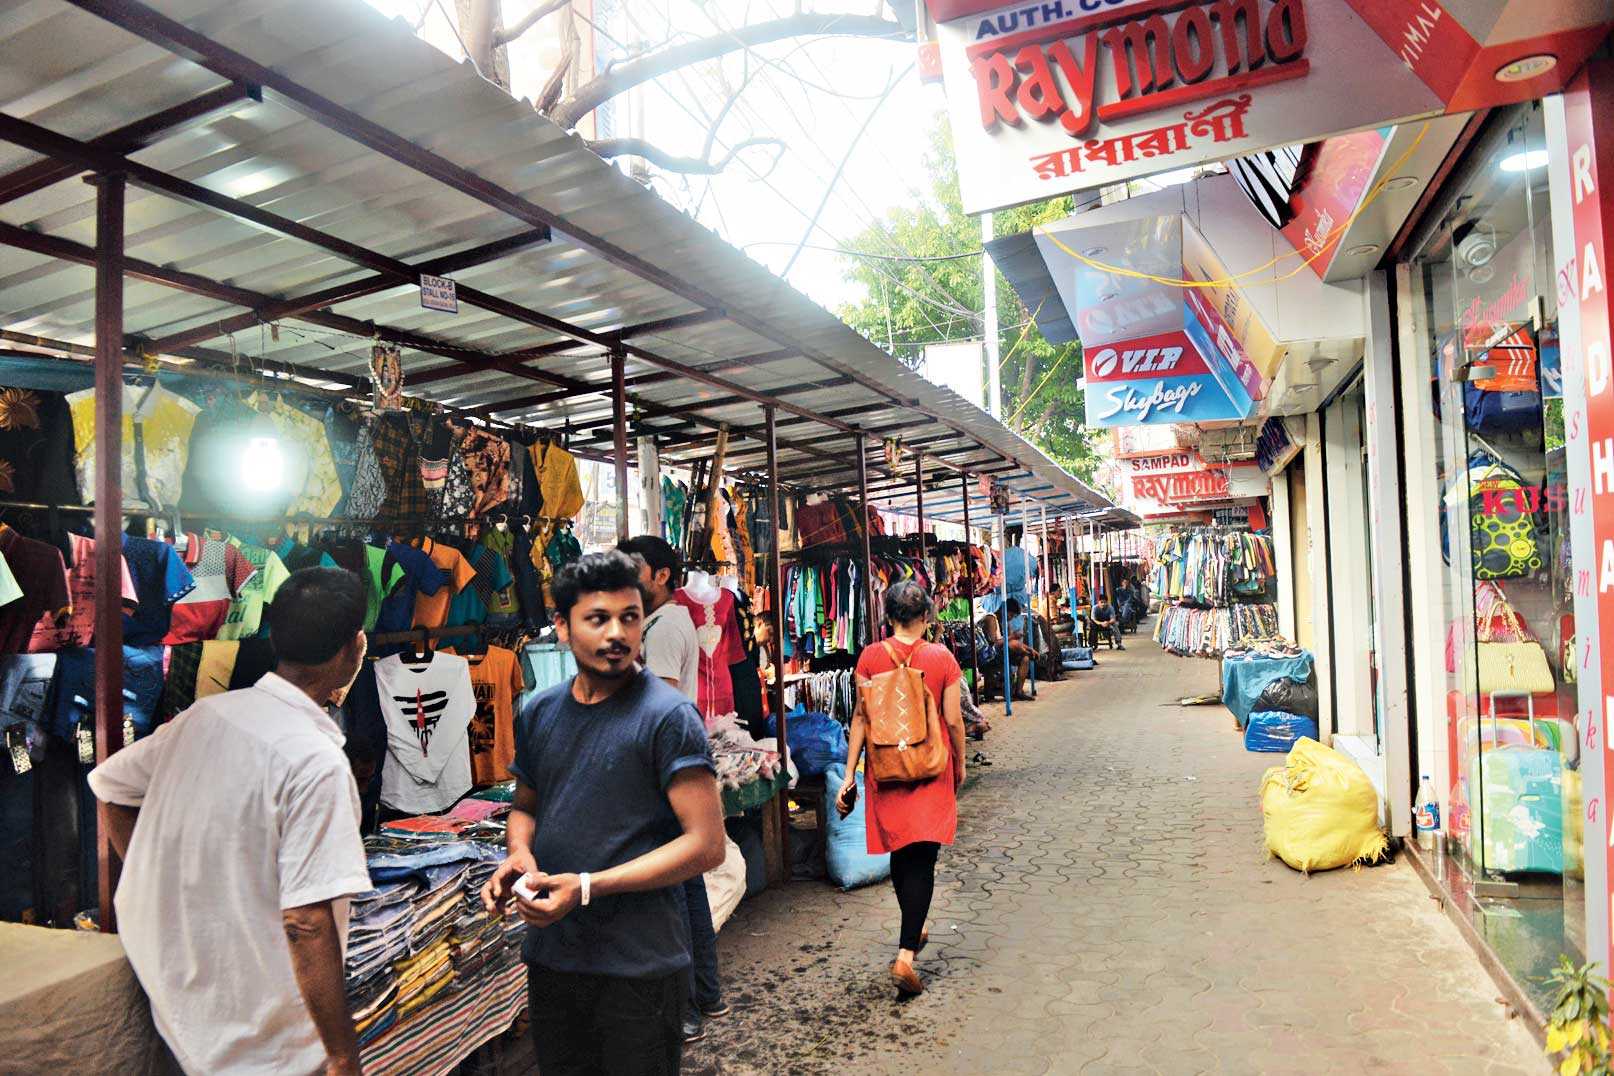 Permanent structures erected by hawkers in Hatibagan.